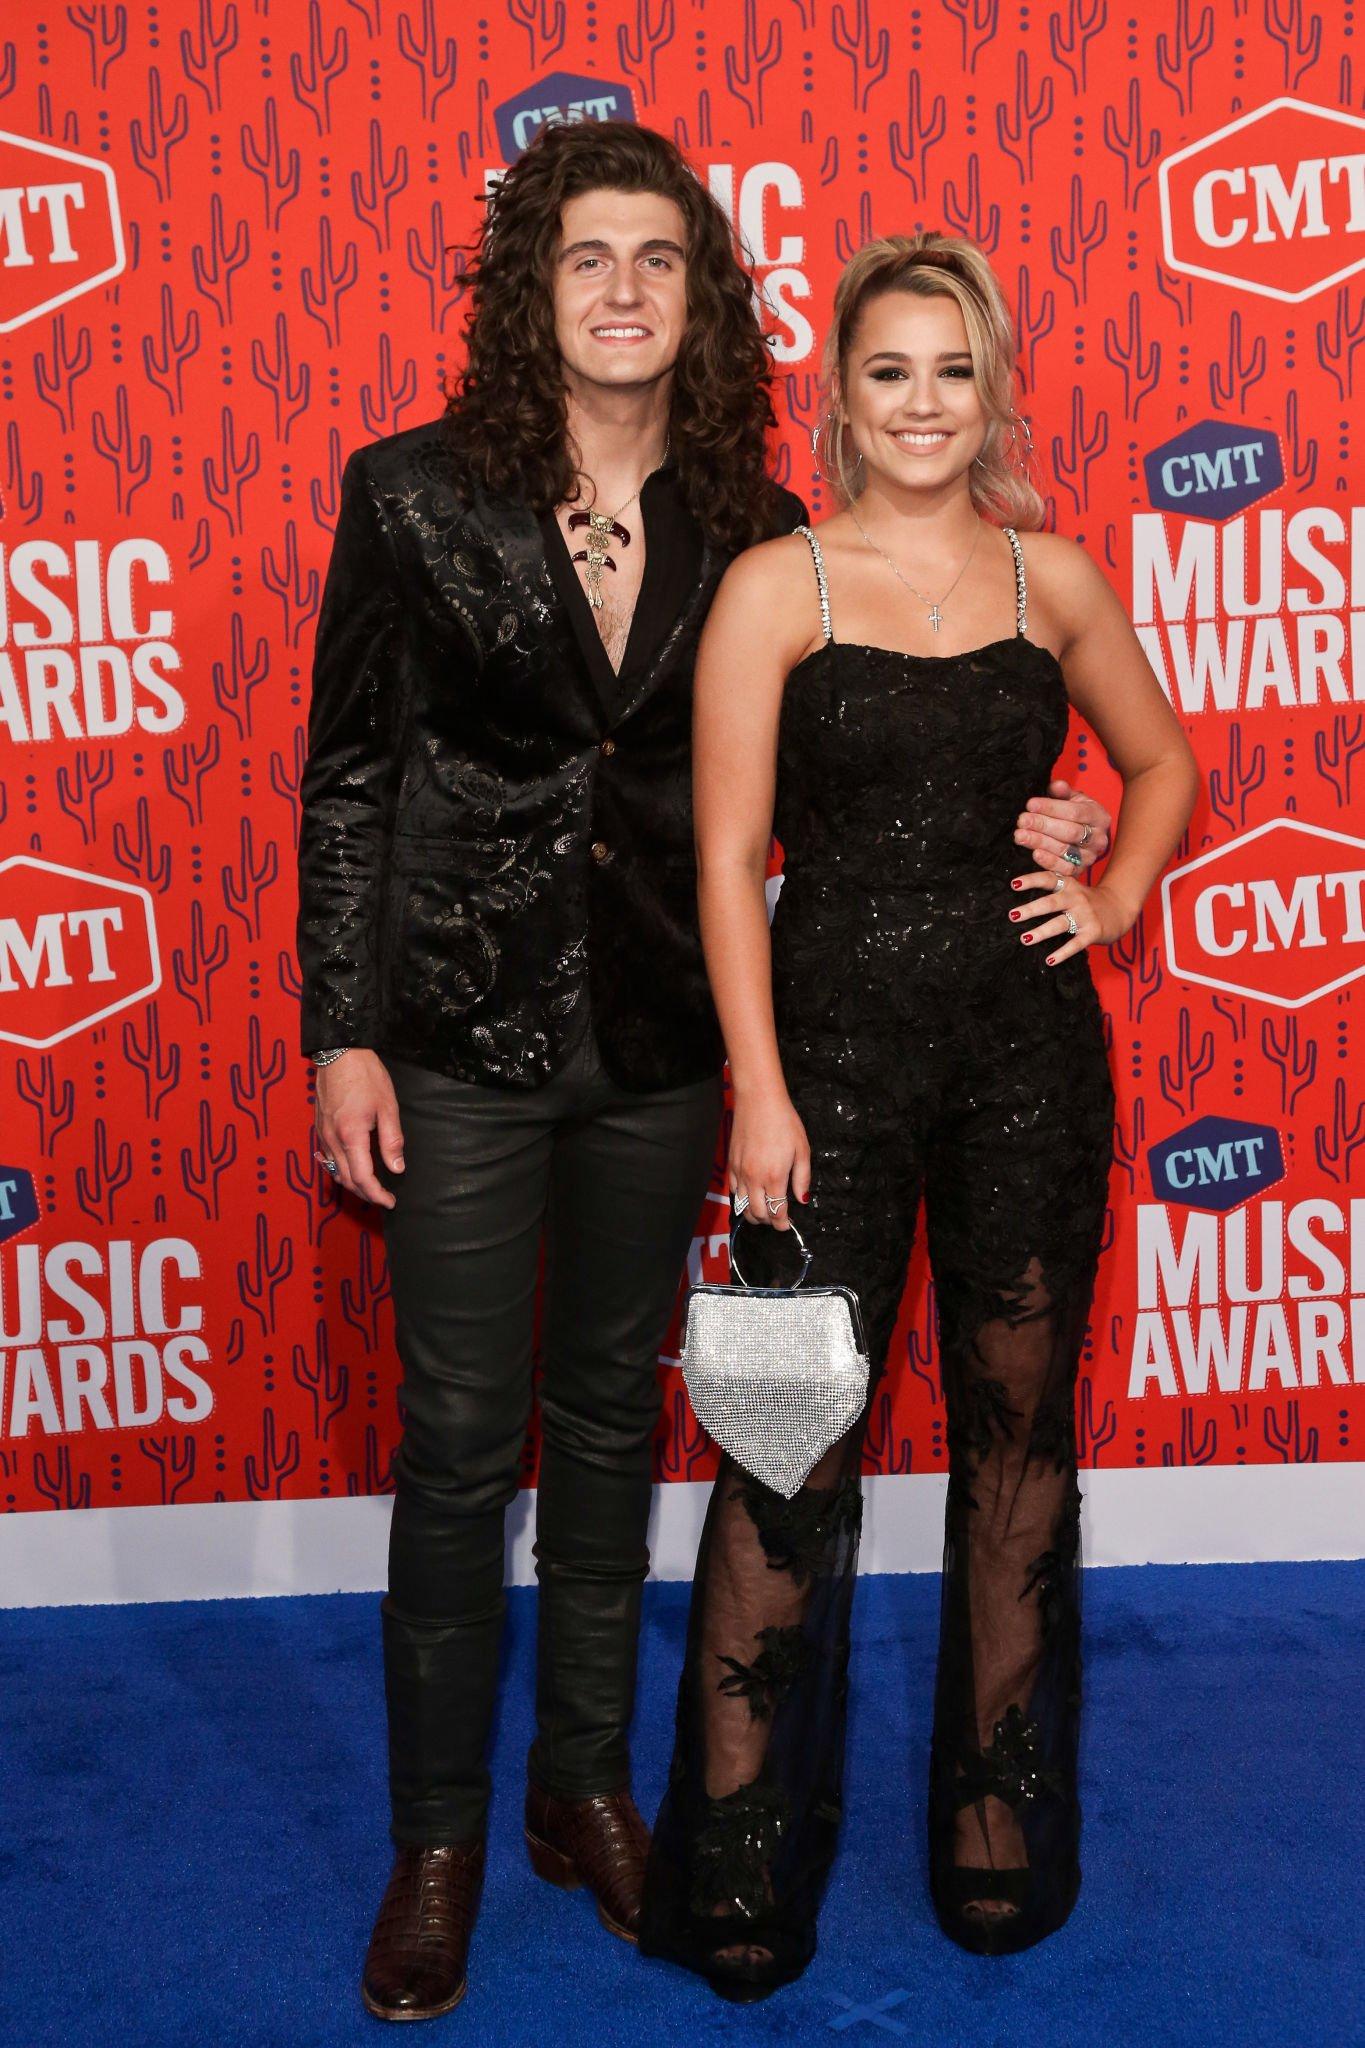 Gabby Barrett and Cade Foehner at the CMT Music Awards on June 5, 2019.
